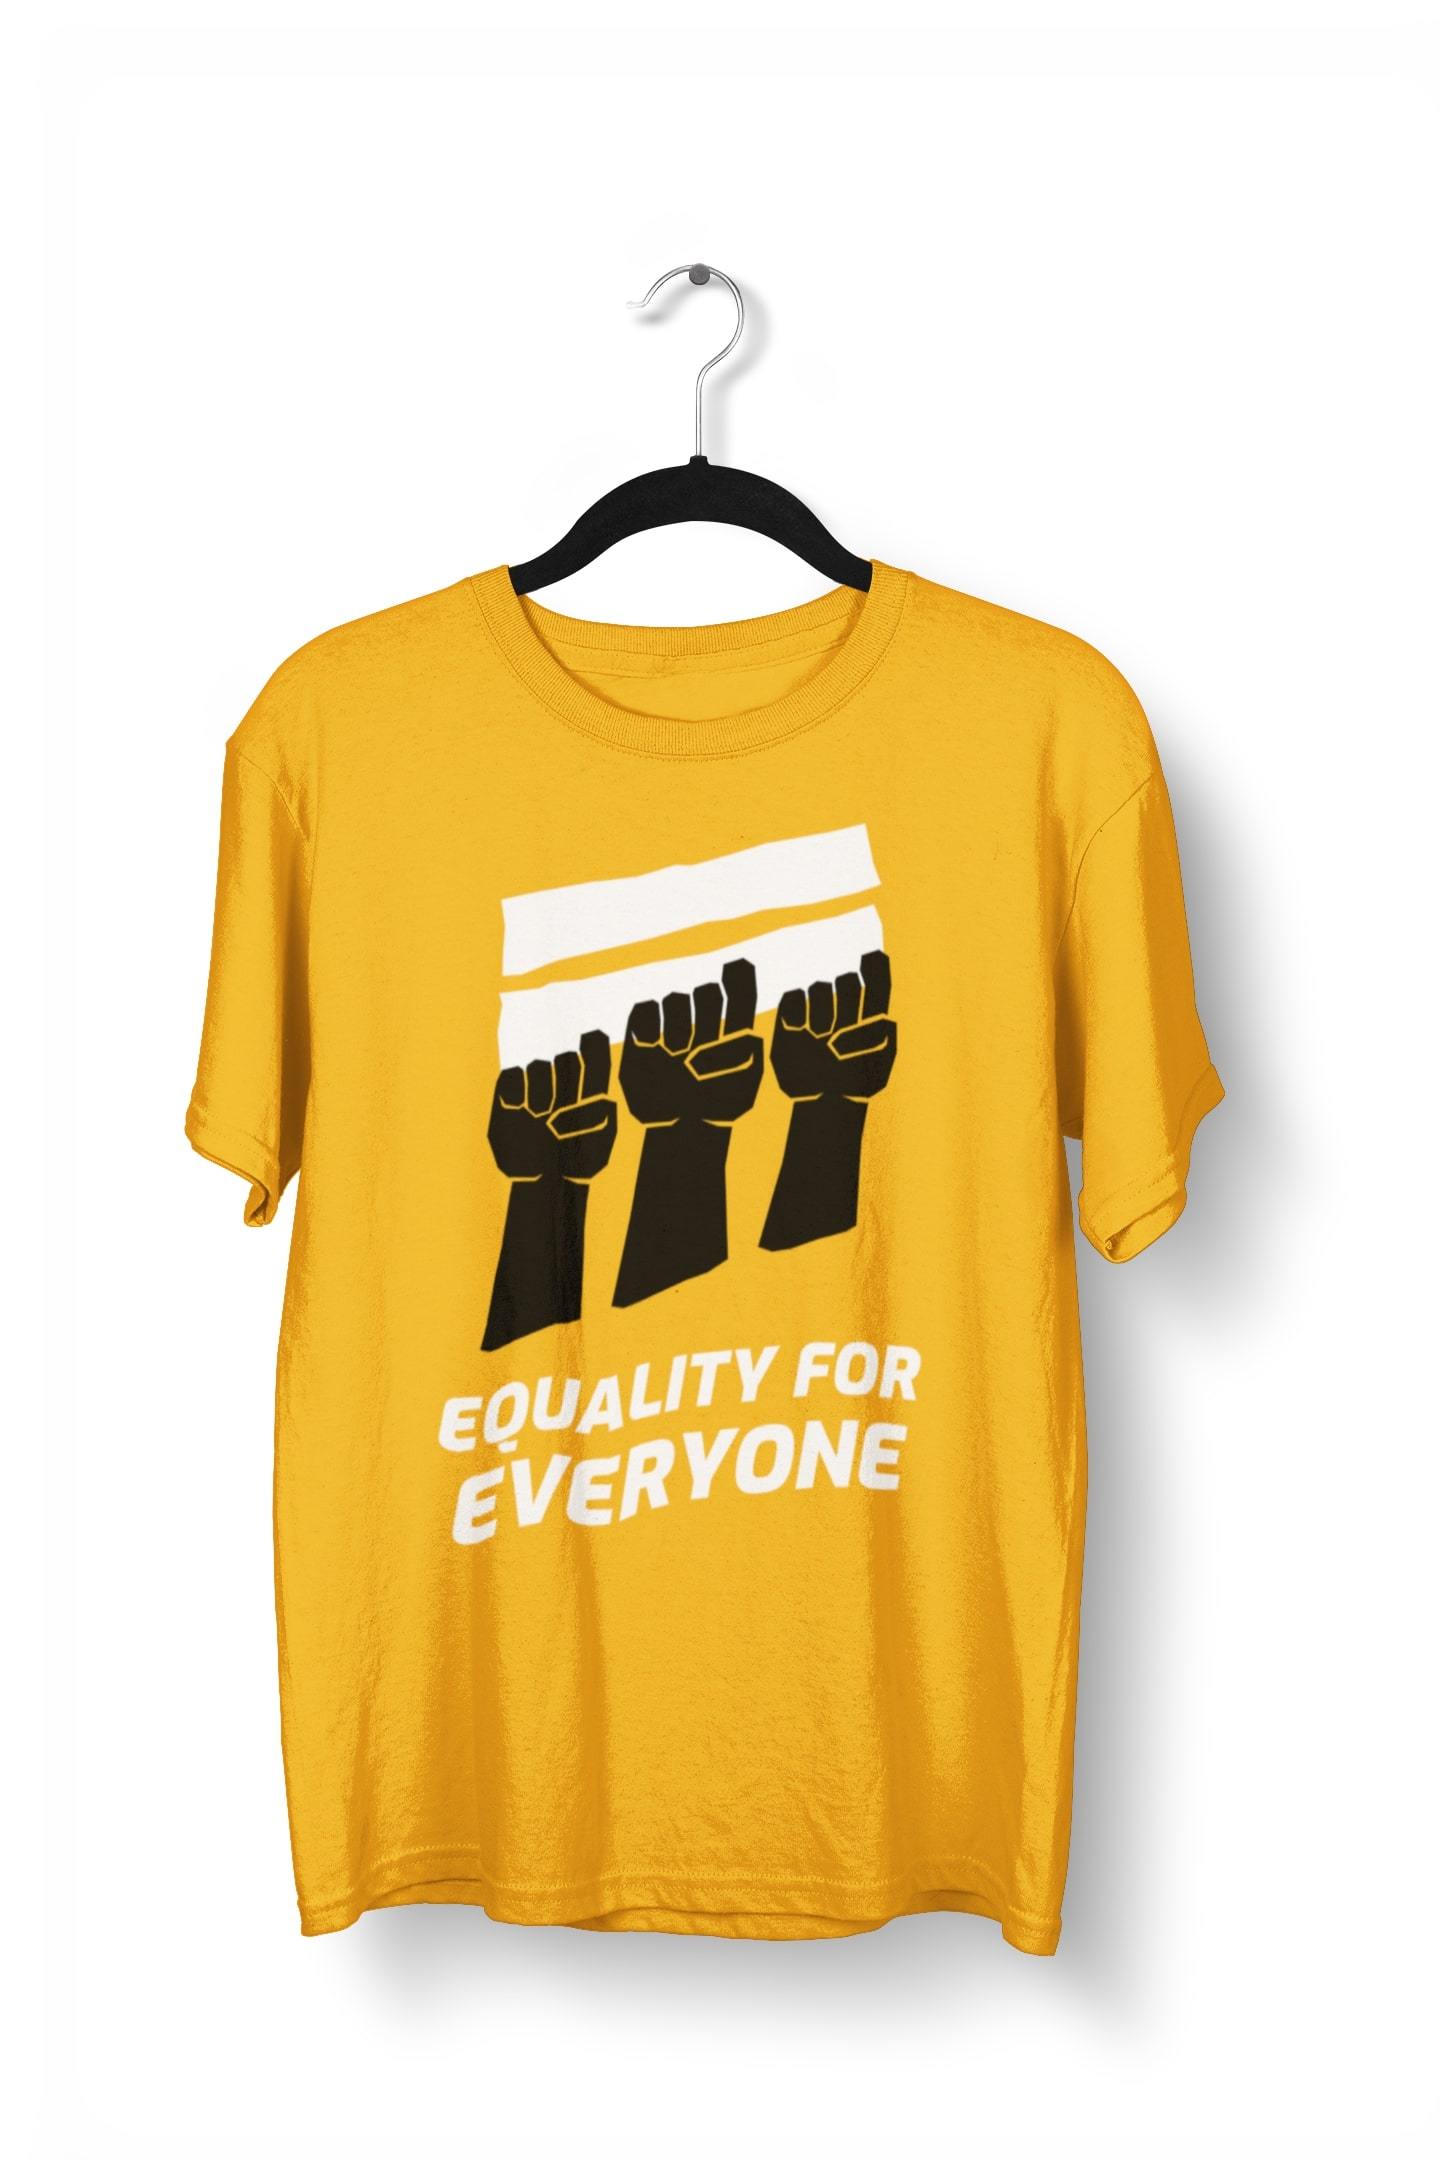 Equality for Everyone T-Shirt for Men